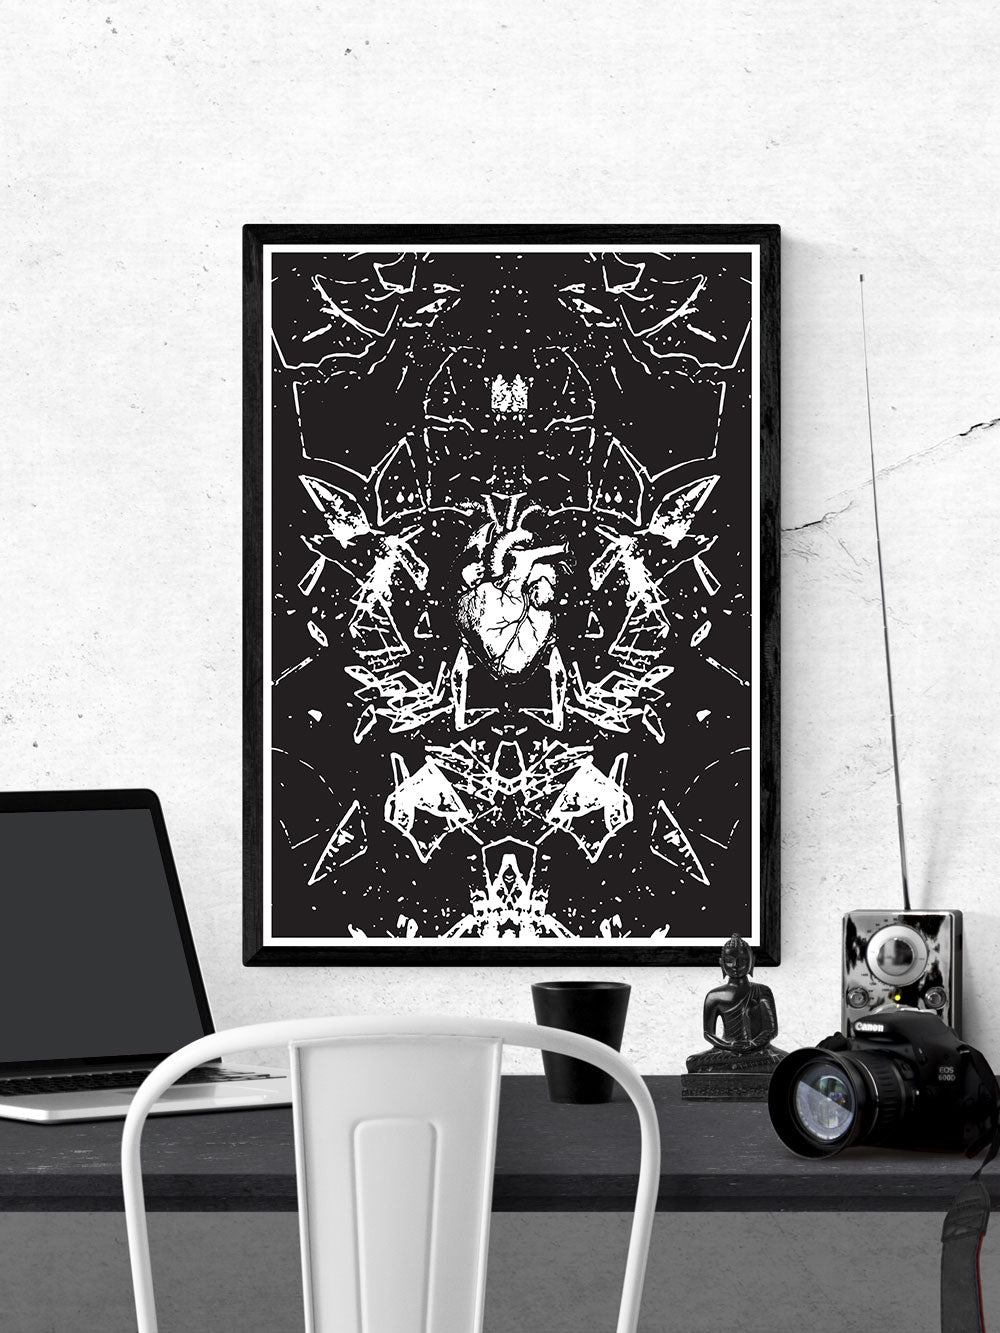 Glasscage Illustration Monochrome Print in a frame on a wall